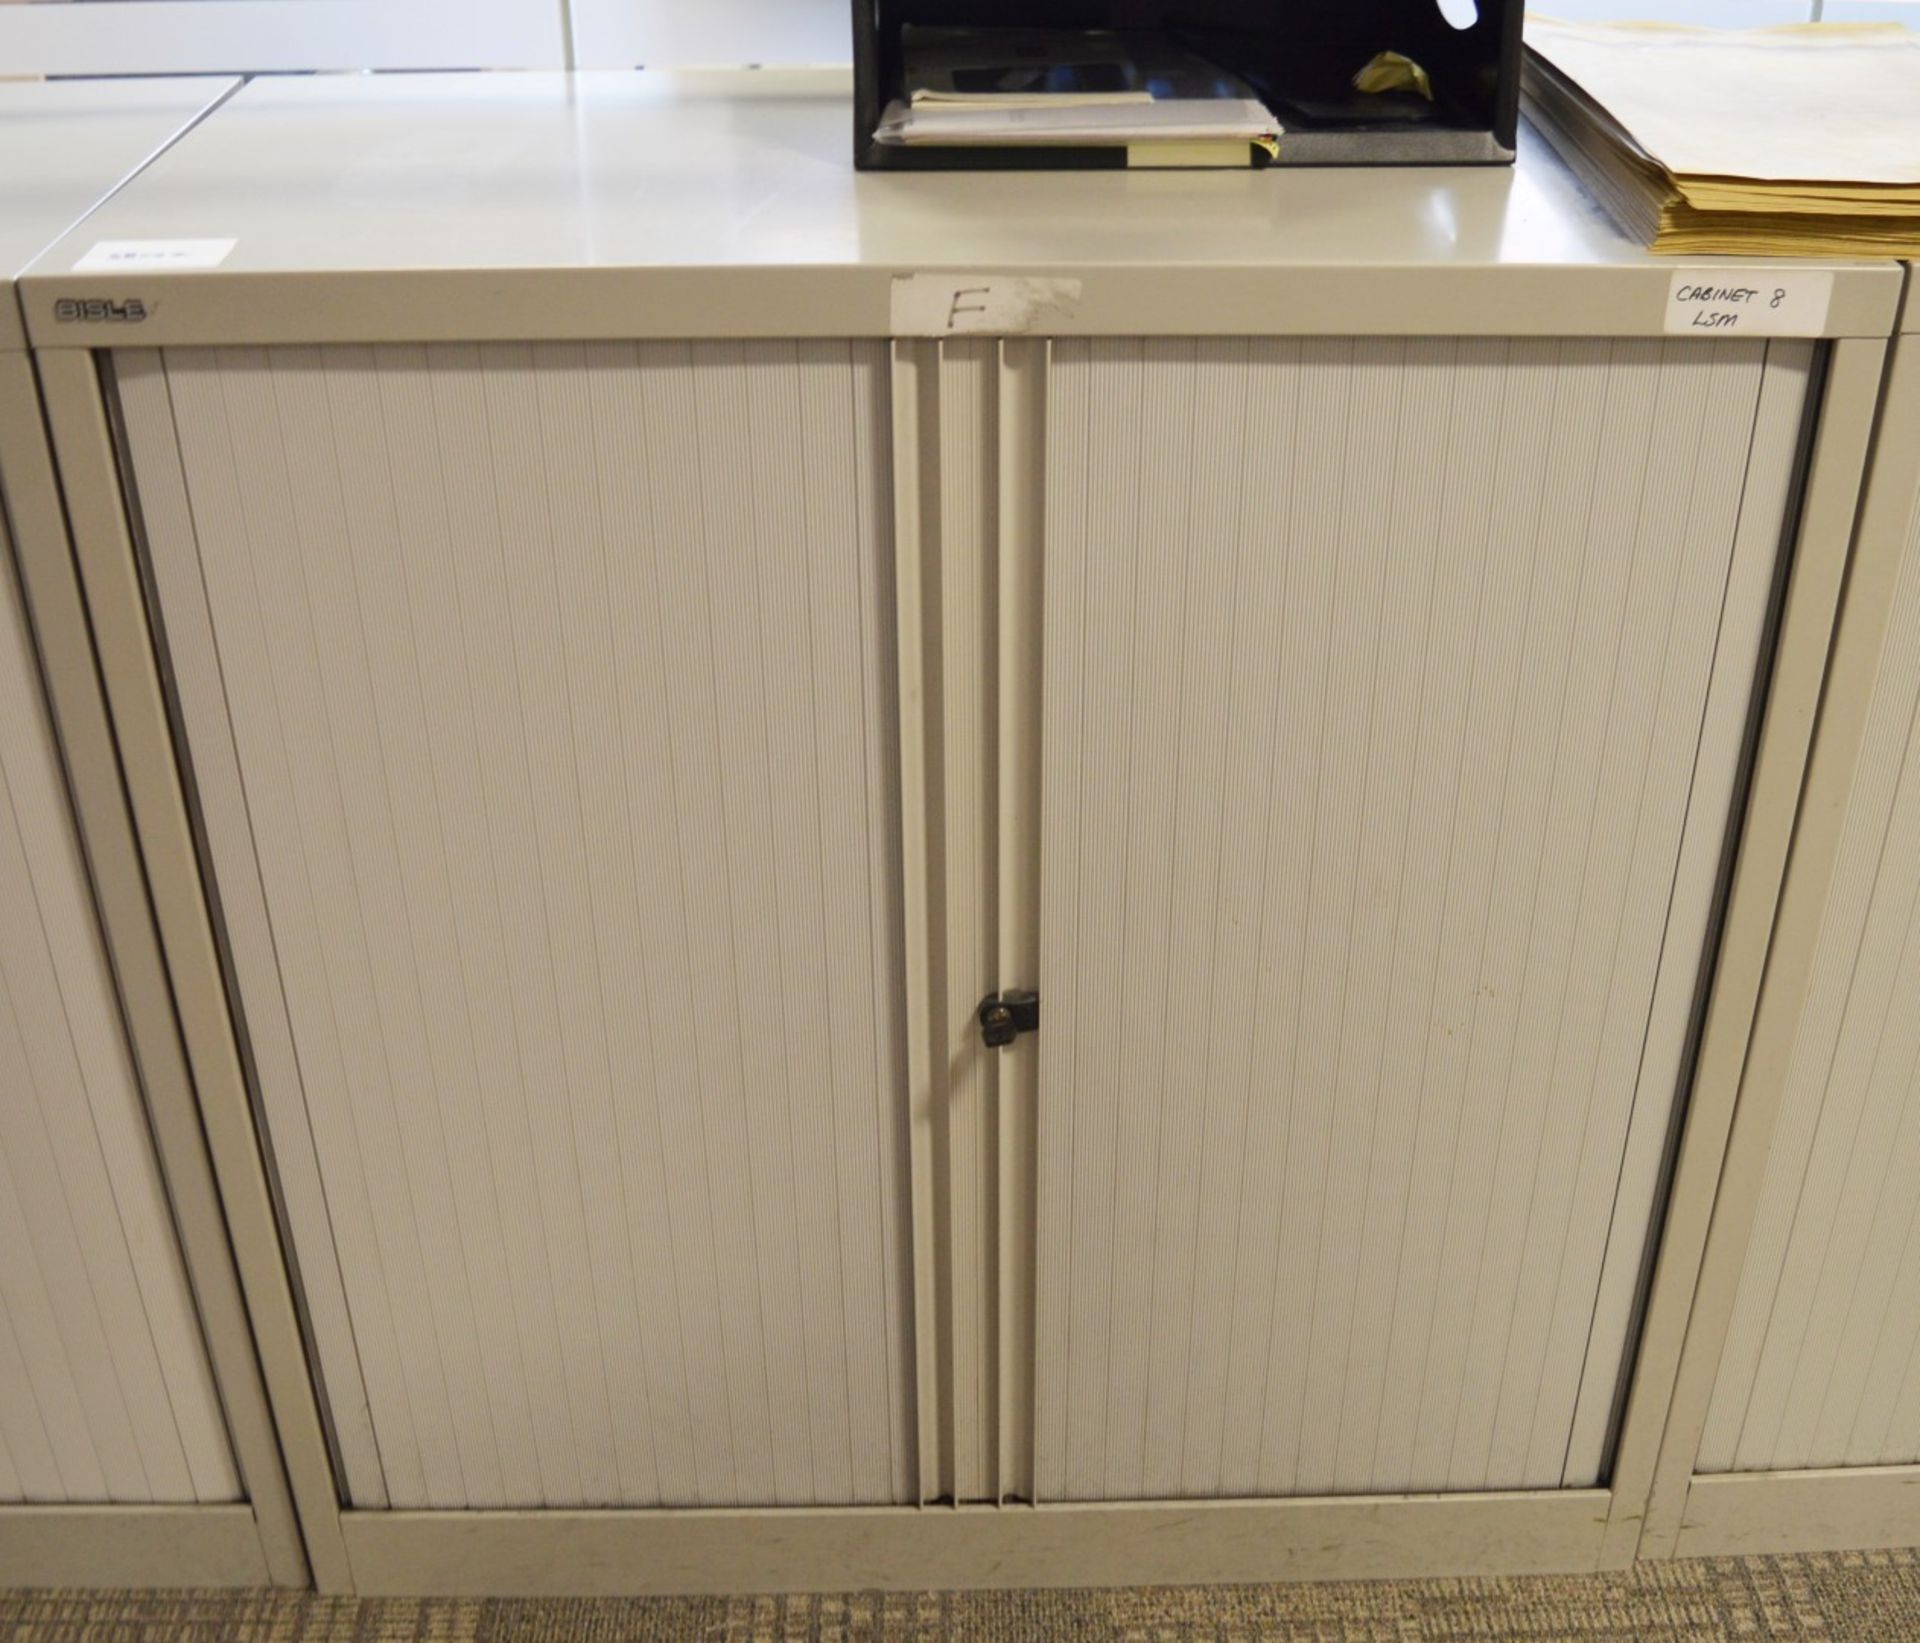 1 x Bisley Office Storage Cabinet With Tambour Sliding Doors - Includes Key - H101 x W100 x D47 cm - - Image 2 of 2